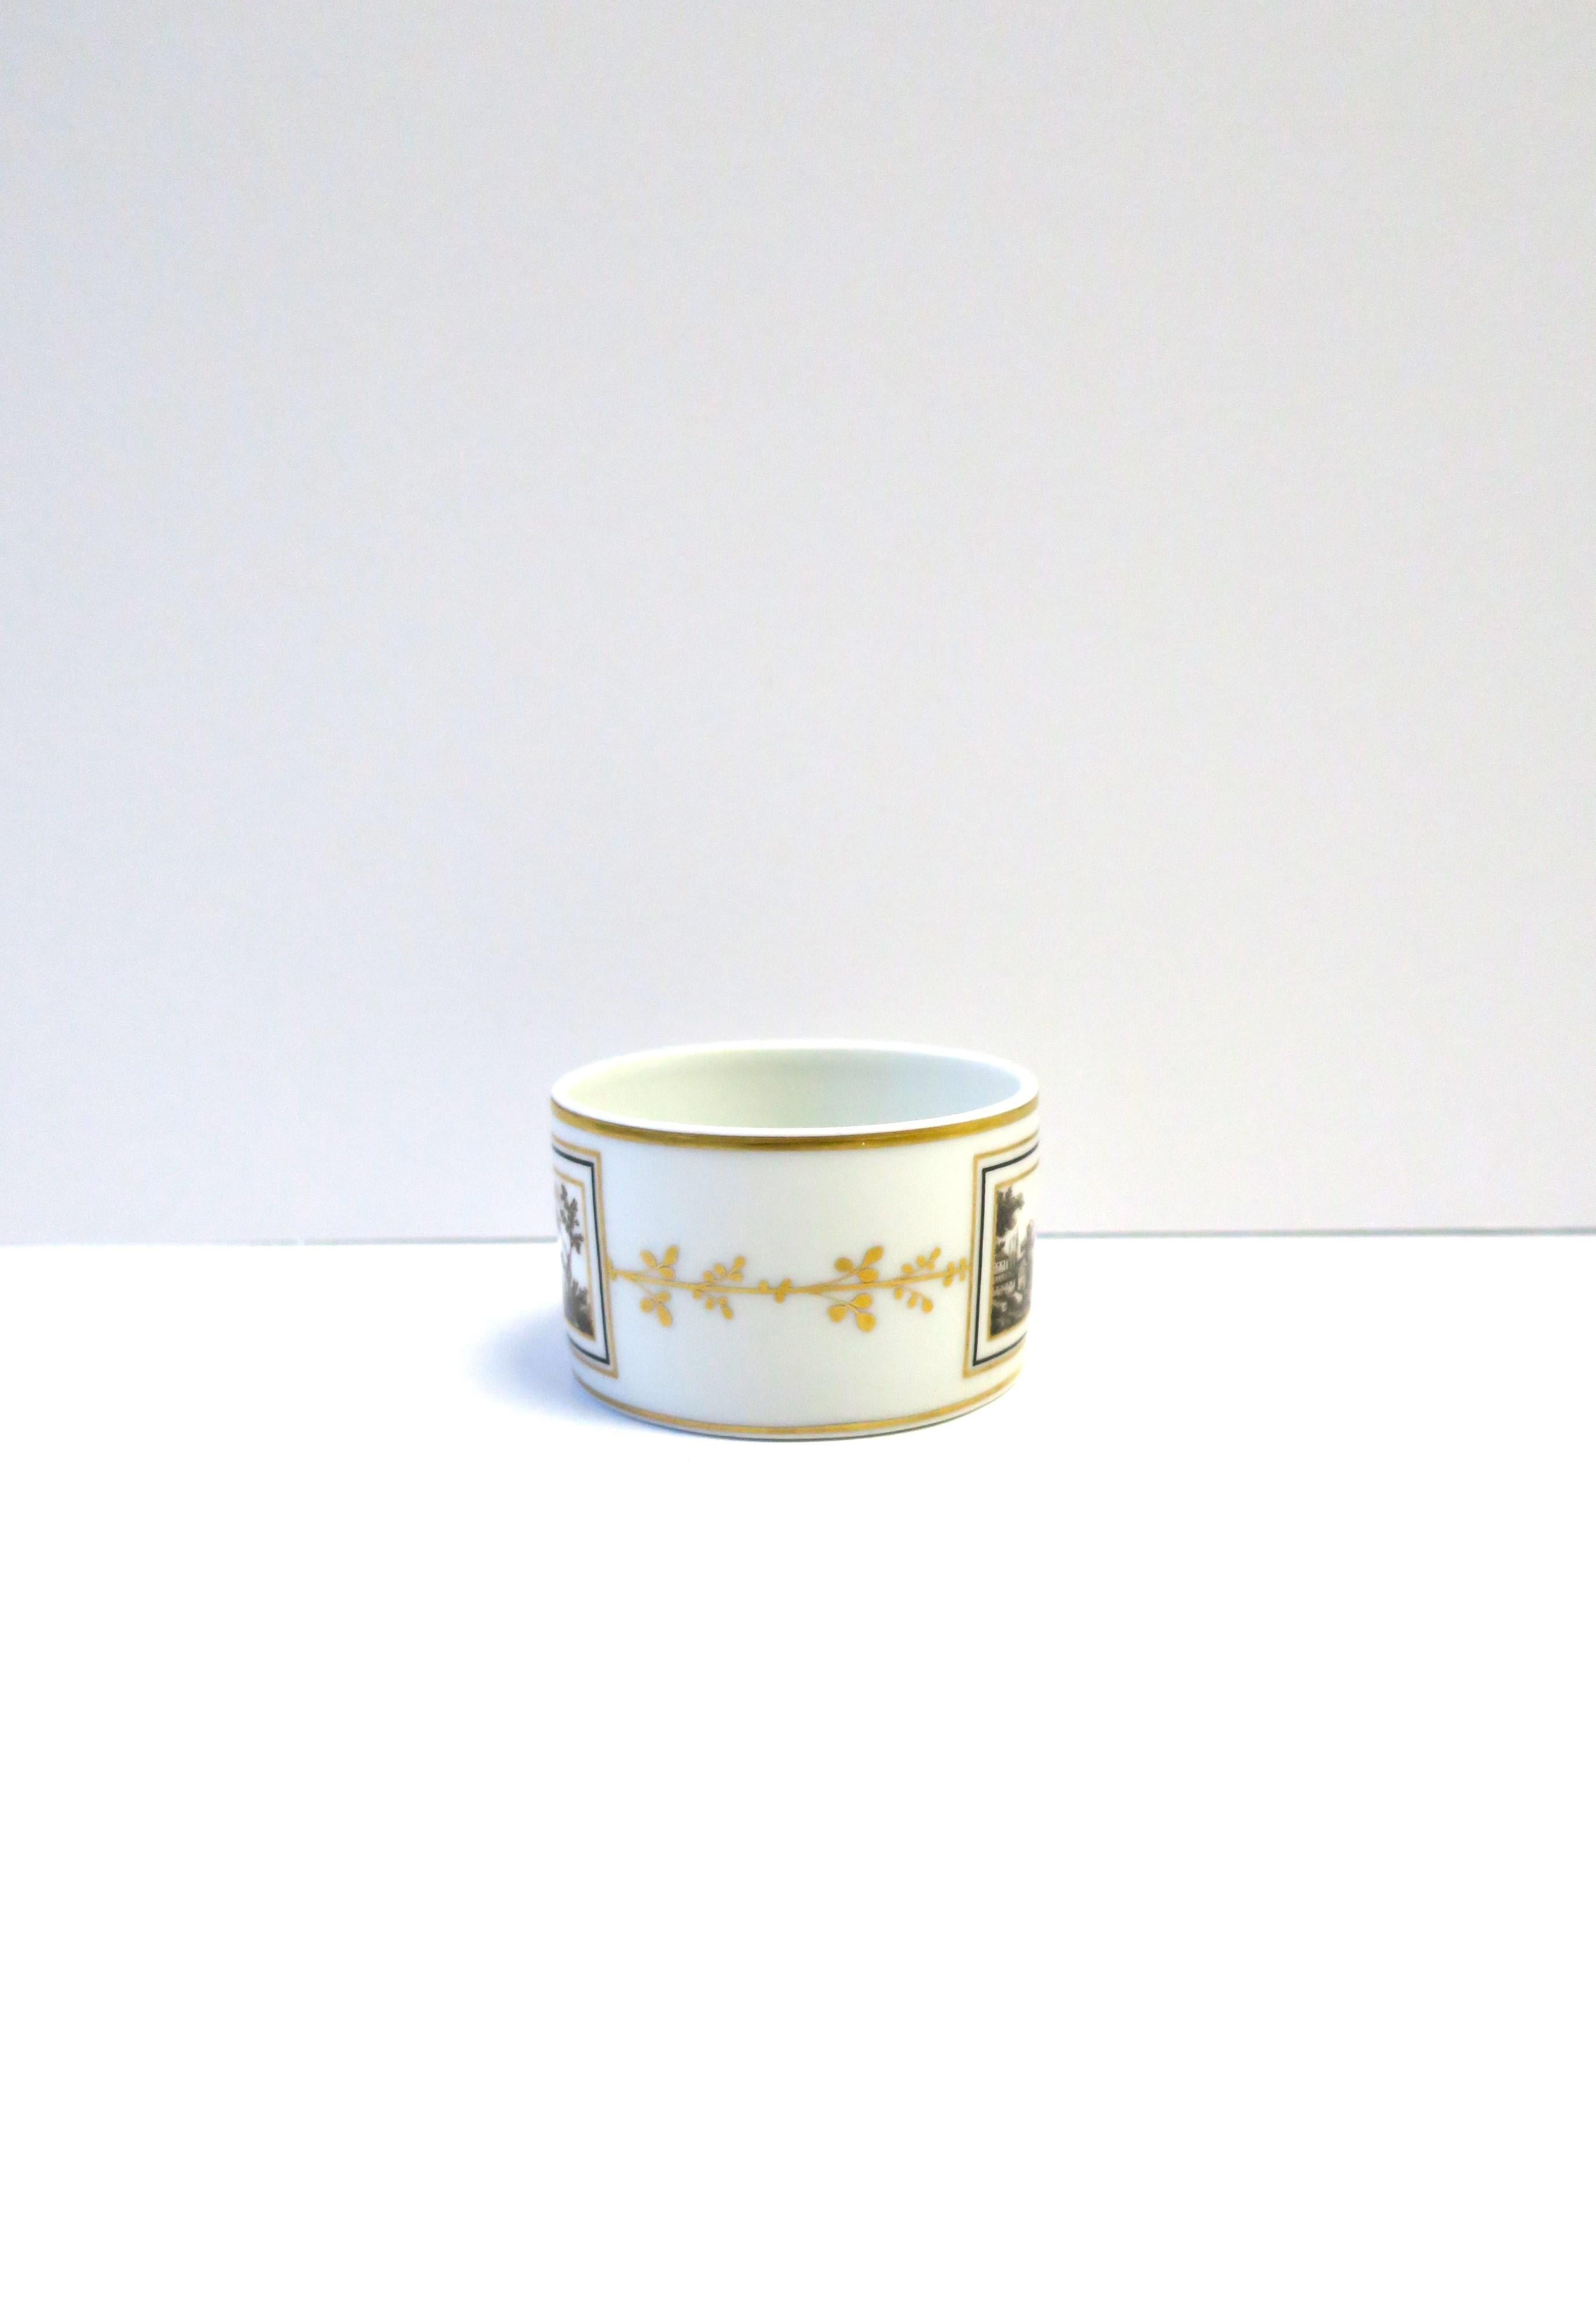 Hand-Painted Richard Ginori White Porcelain & Gold Italian Jewelry Dish or Vessel For Sale